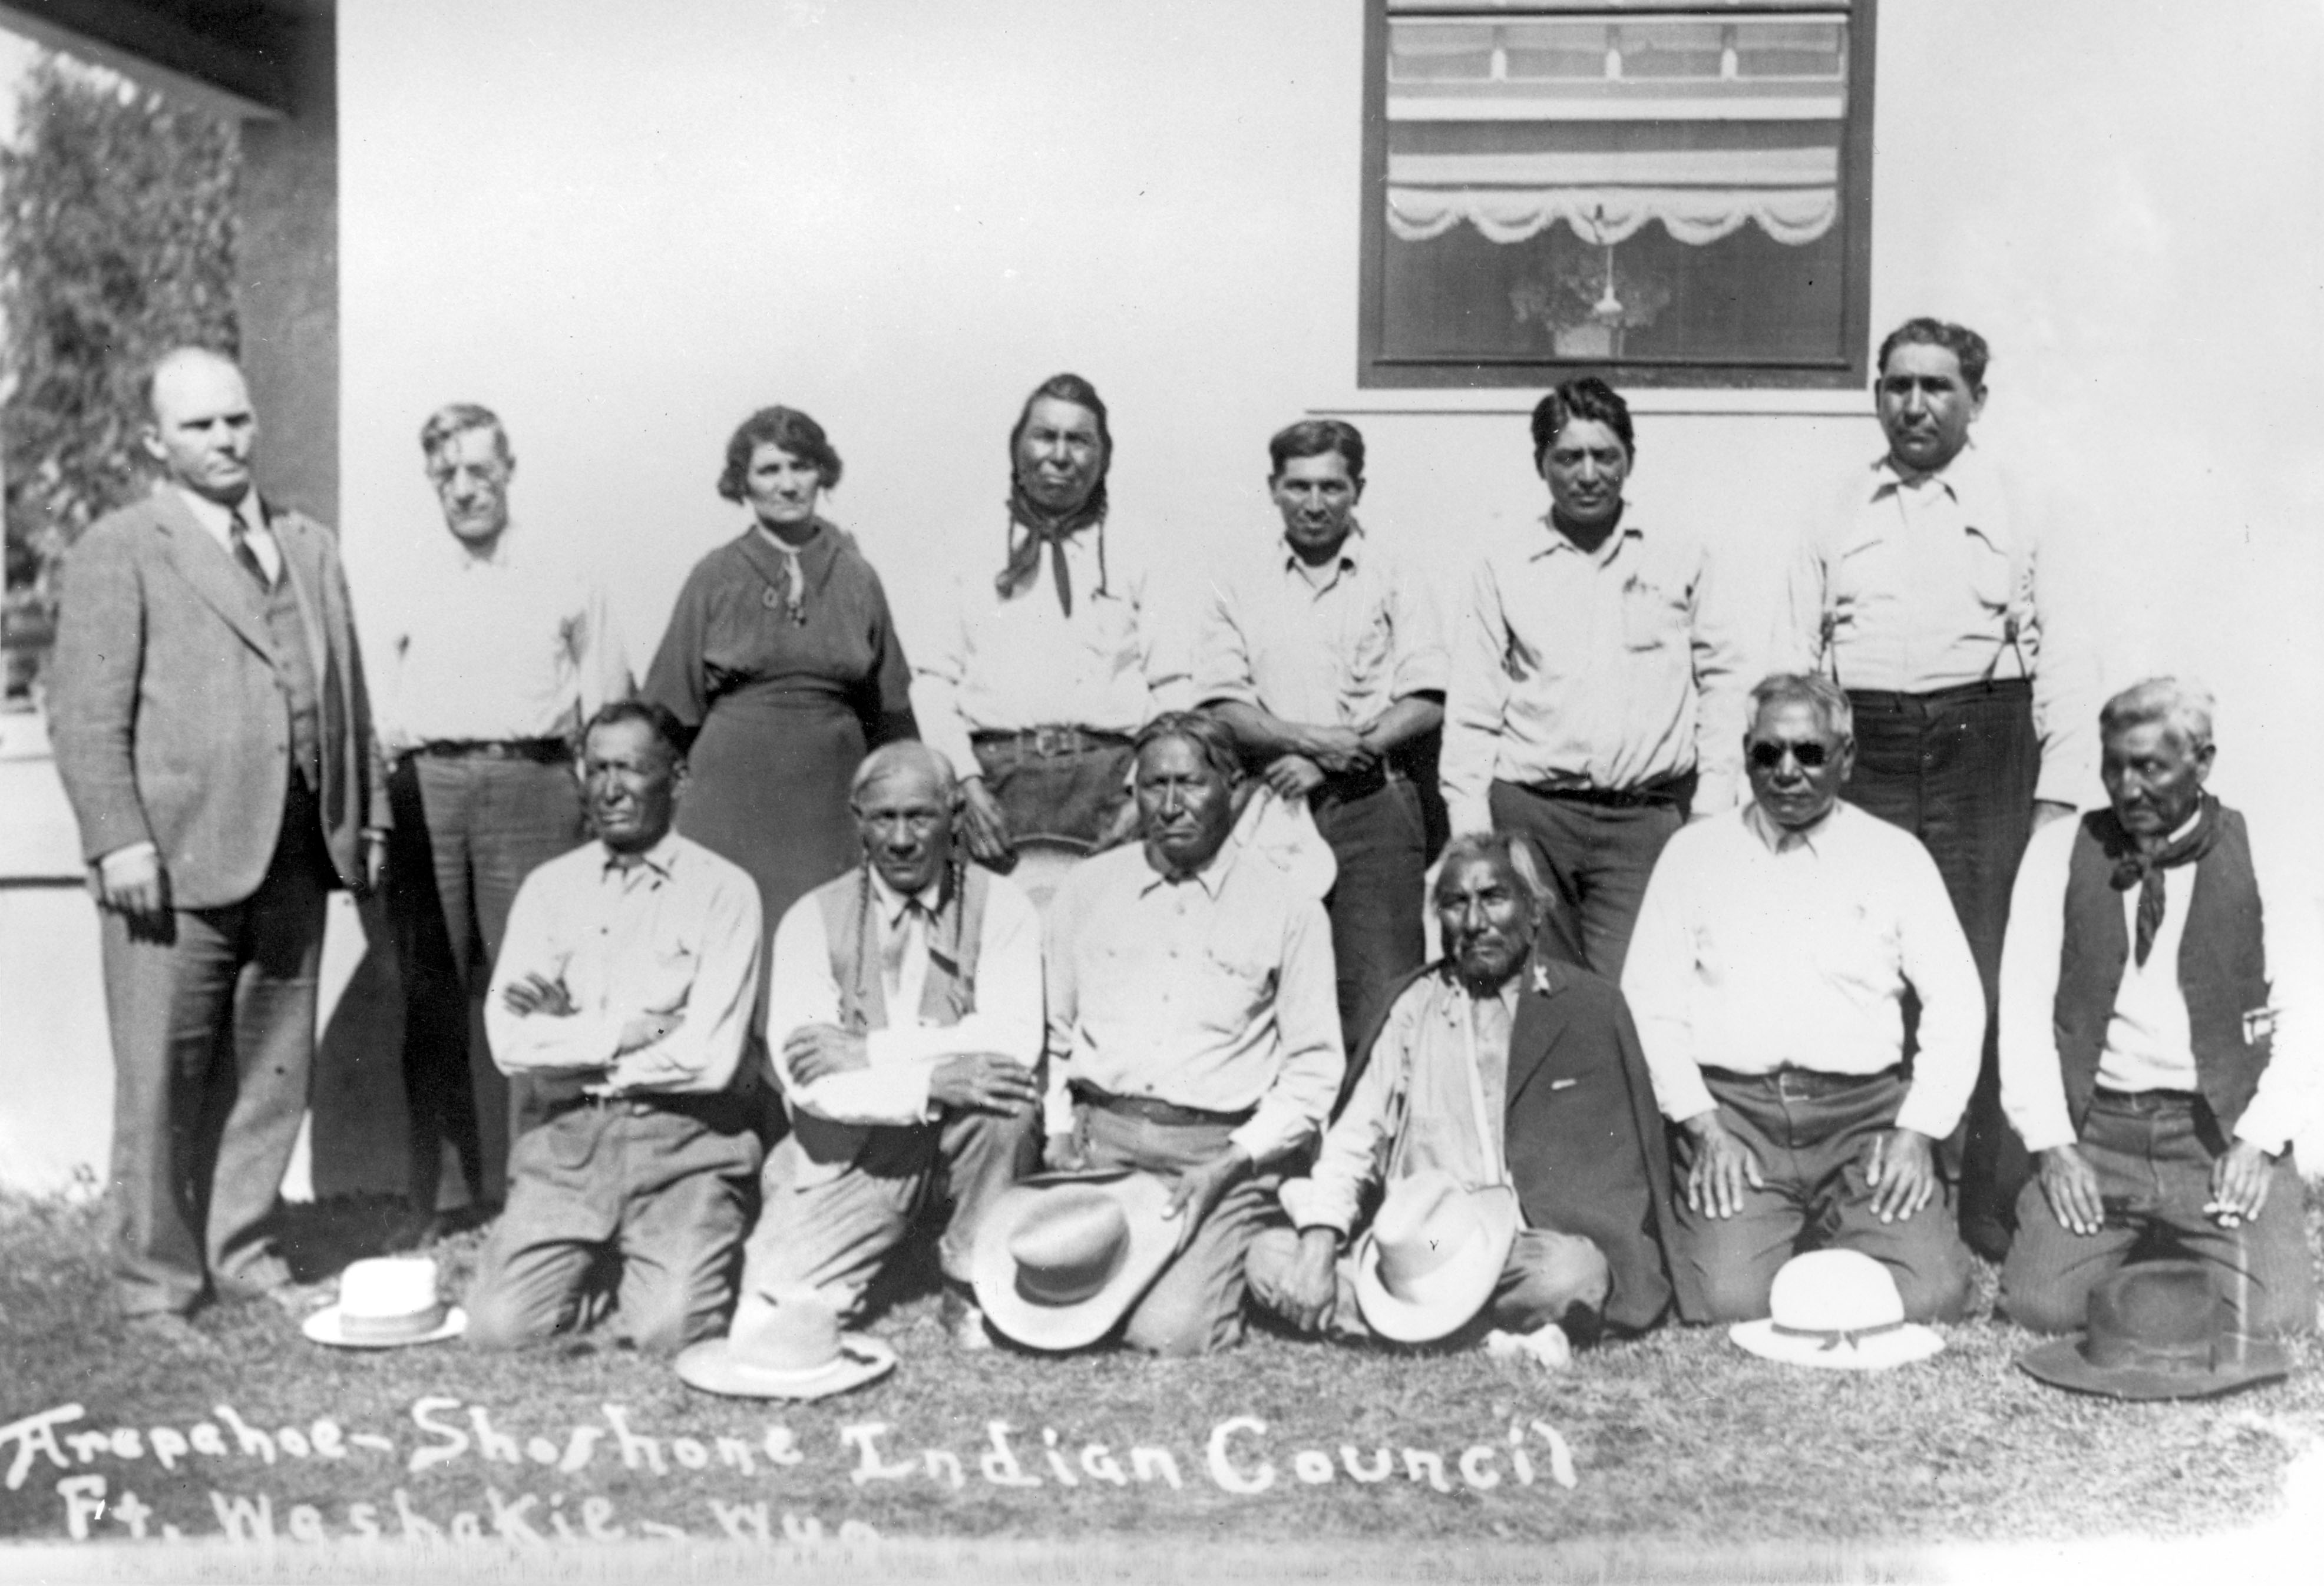 Two rows of people, the front row kneeling and the back row standing, with one woman standing in the back row.  The photograph is labeled Ft. Washakie Wyo.